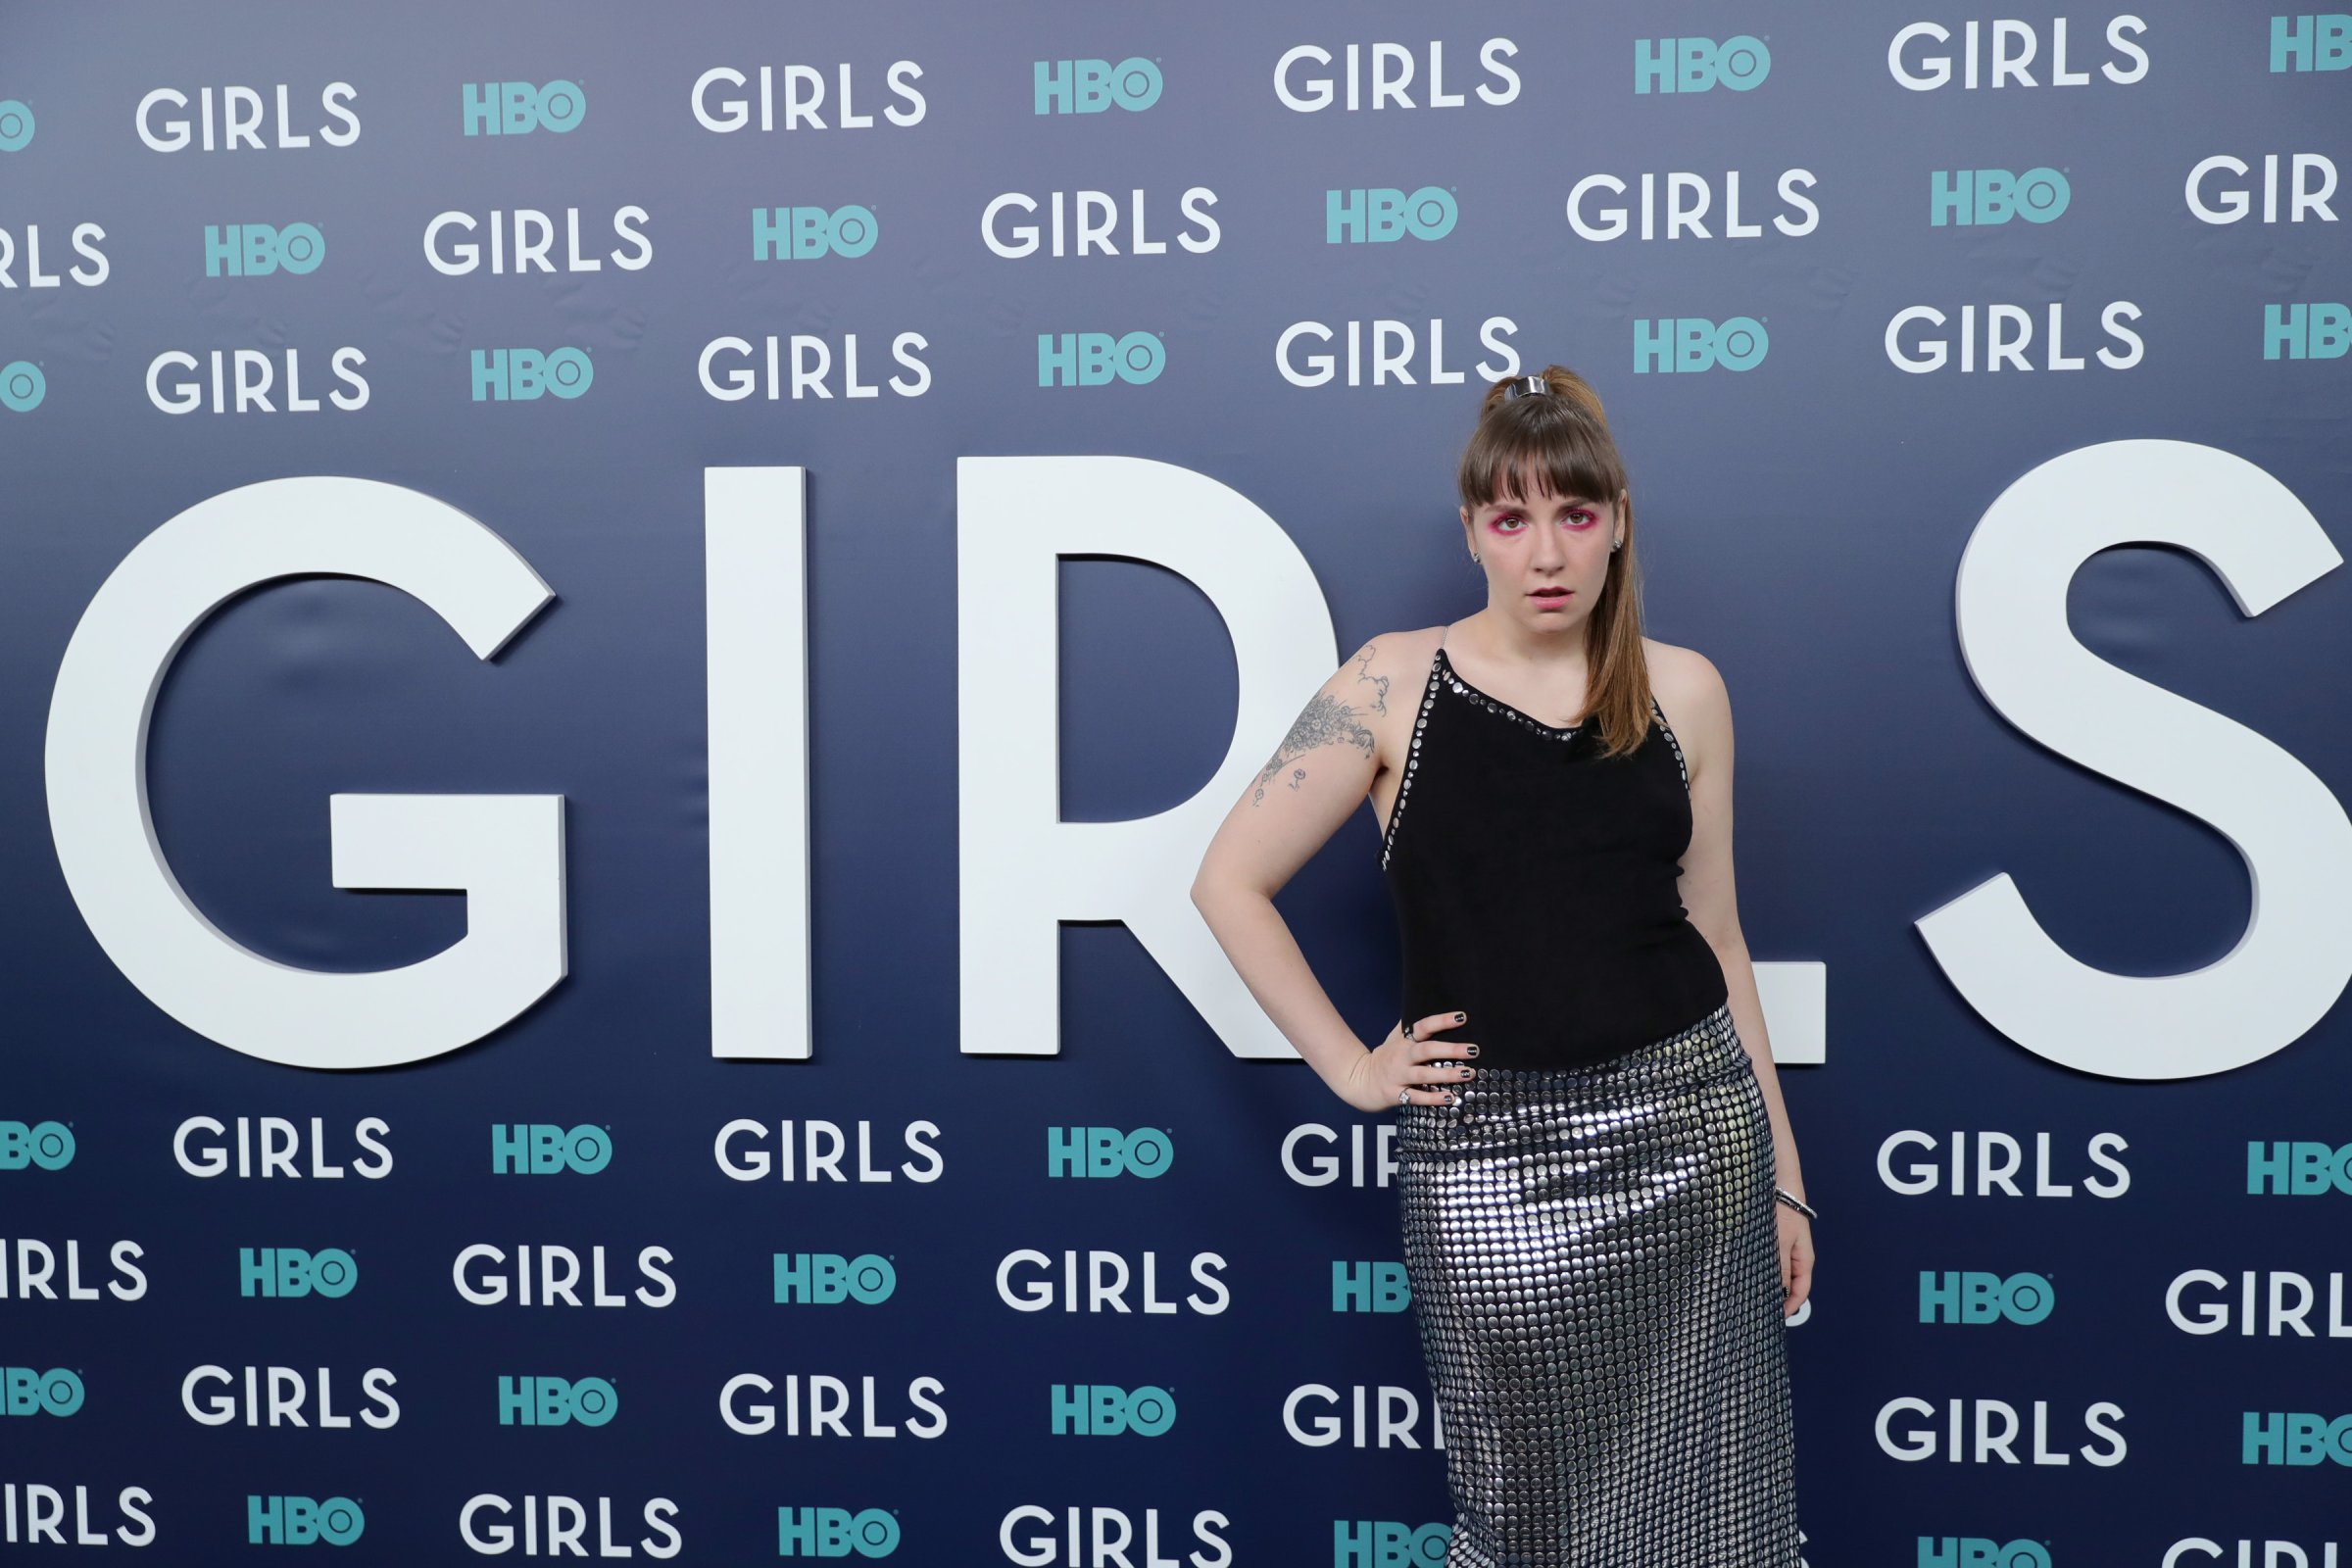 The New York Premiere Of The Sixth &amp; Final Season Of "Girls" - Red Carpet